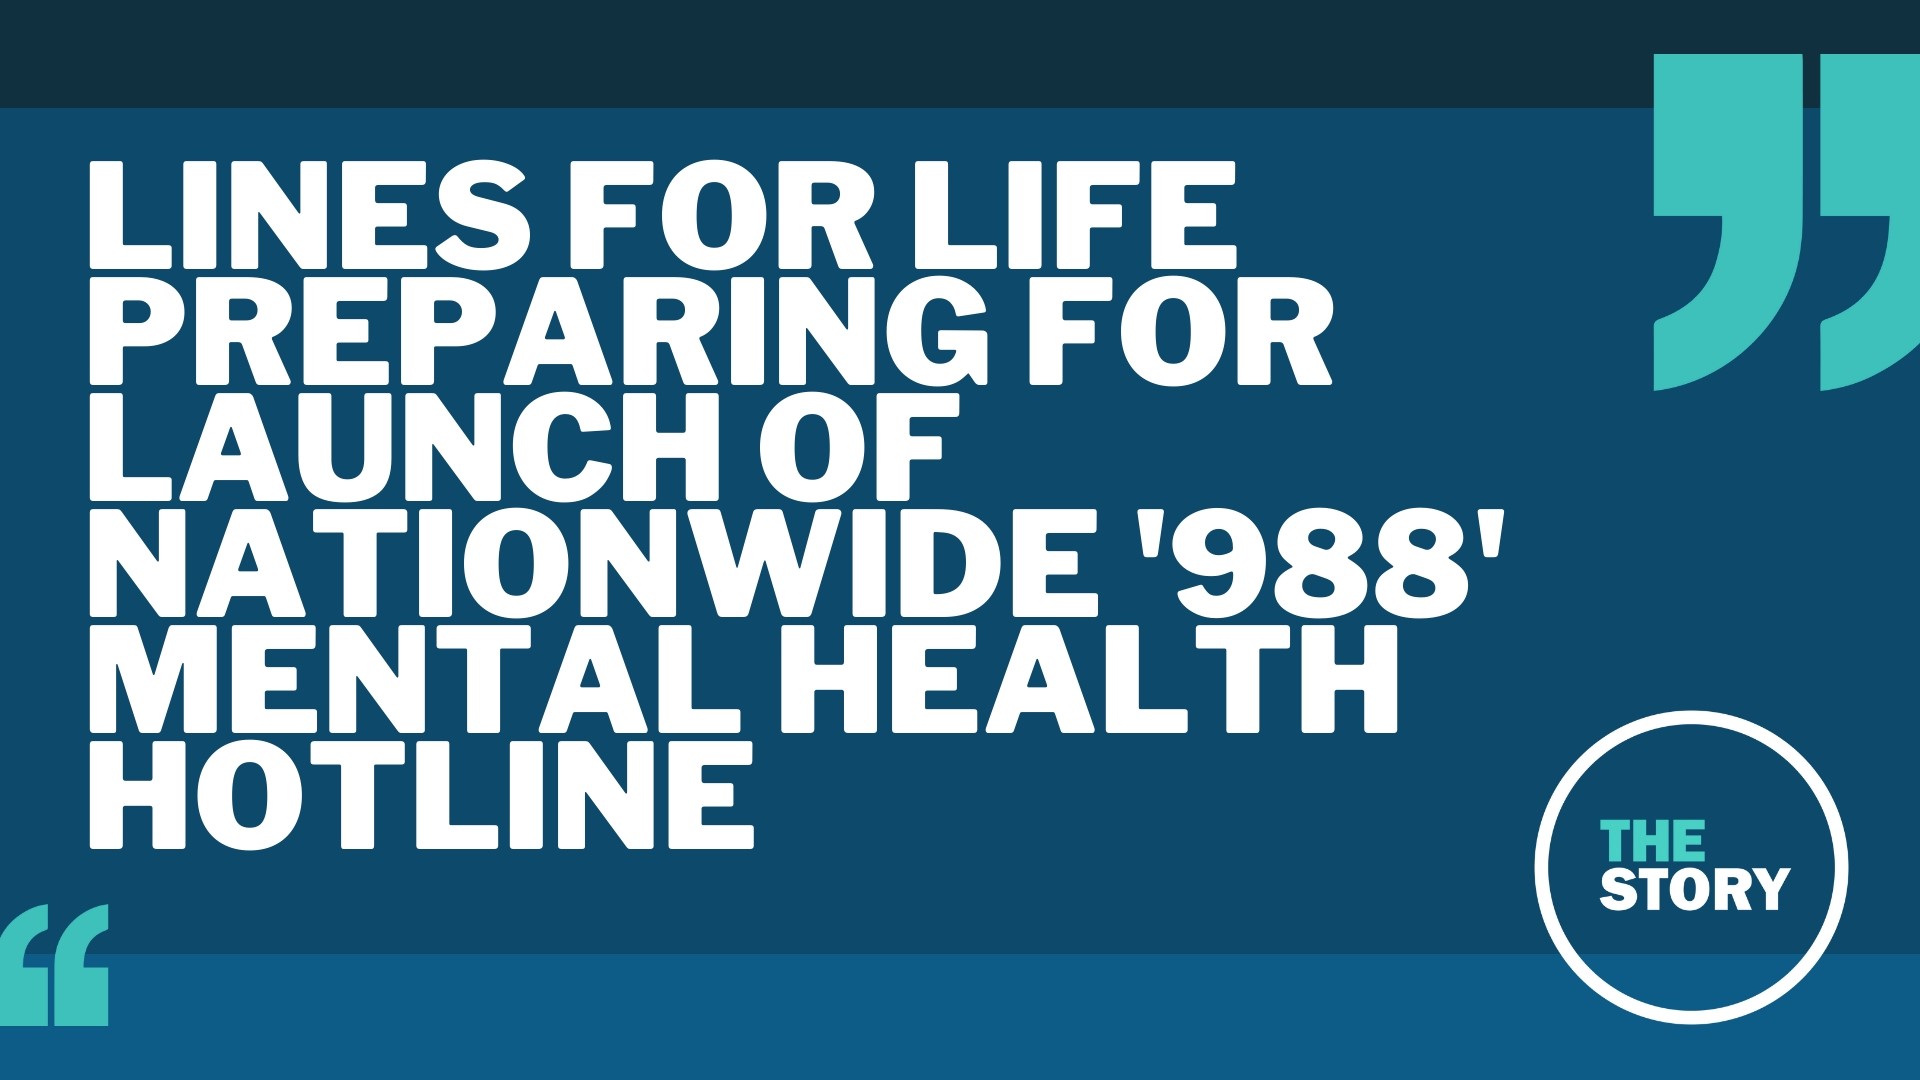 Starting July 16, people struggling with mental health can call 988. Lines for Life CEO Dwight Holton believes the simple number will make a difference.